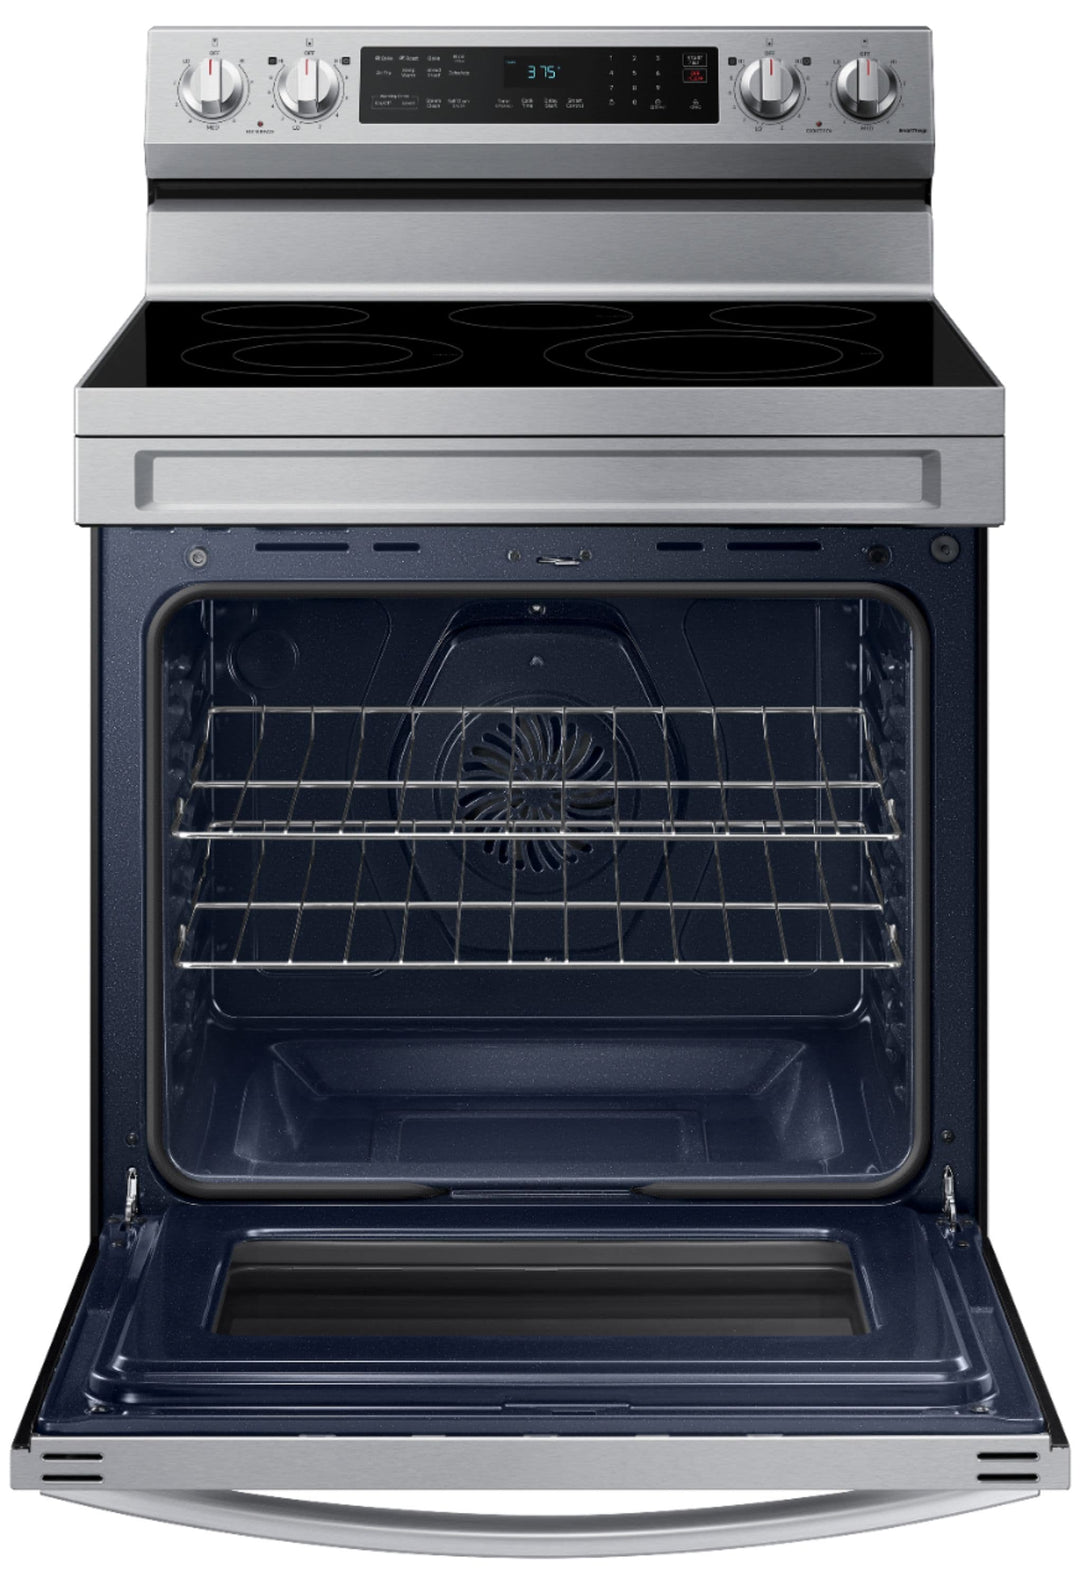 Samsung - 6.3 cu. ft. Freestanding Electric Range with WiFi, No-Preheat Air Fry & Convection - Stainless steel_3